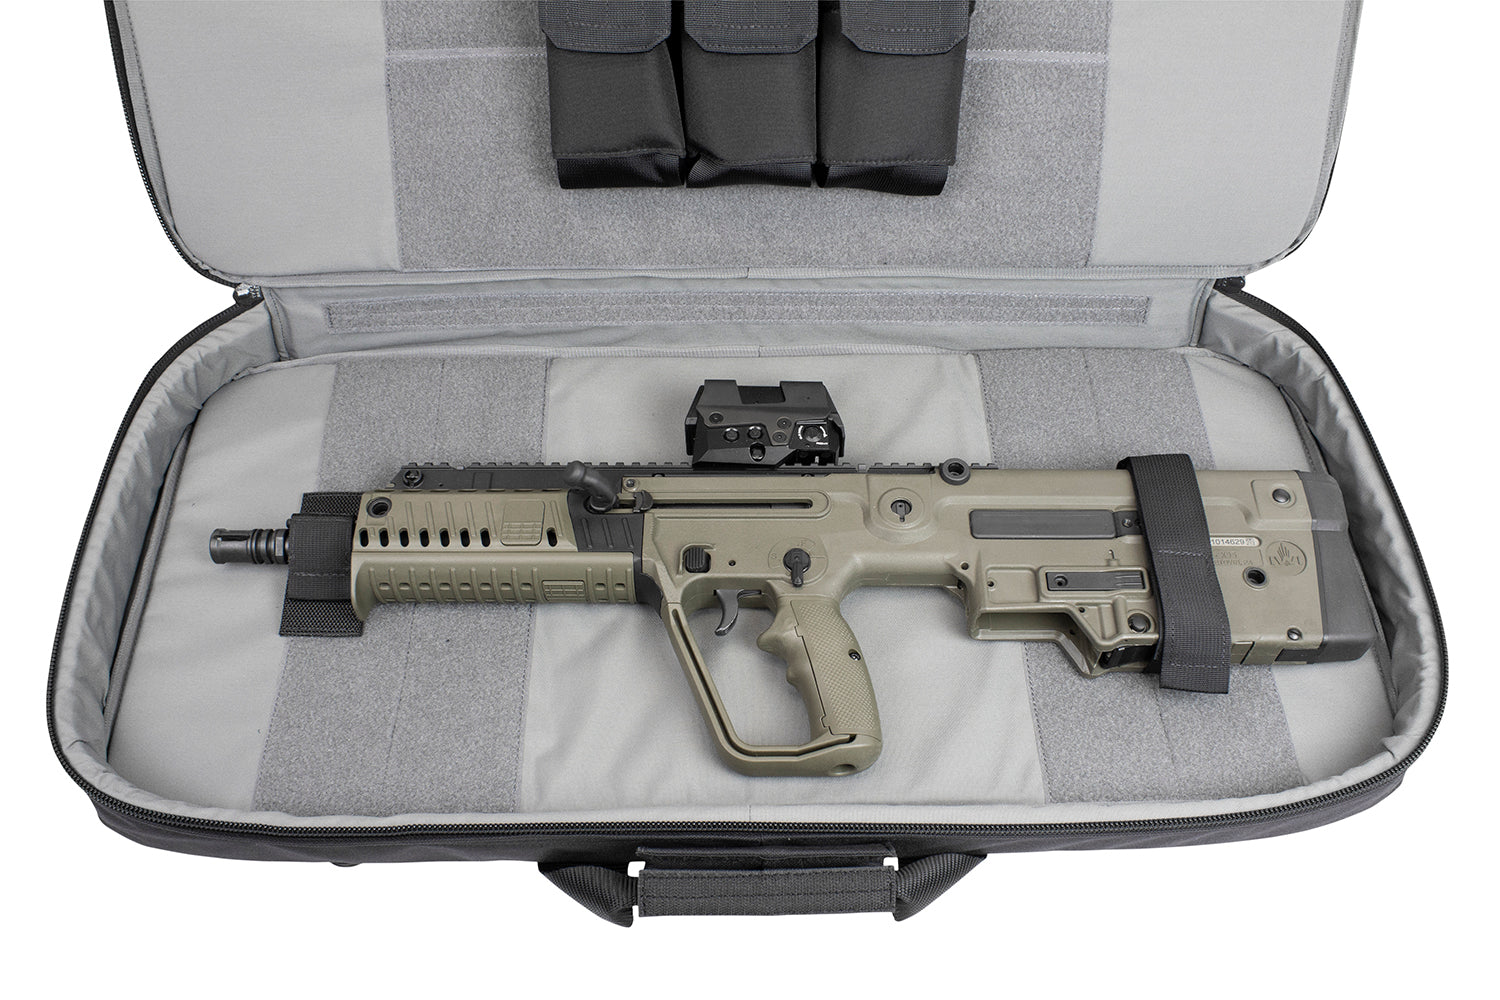 Discreet Rifle Case with bullpup rifle shown. Secured with hook and loop tie-down straps.